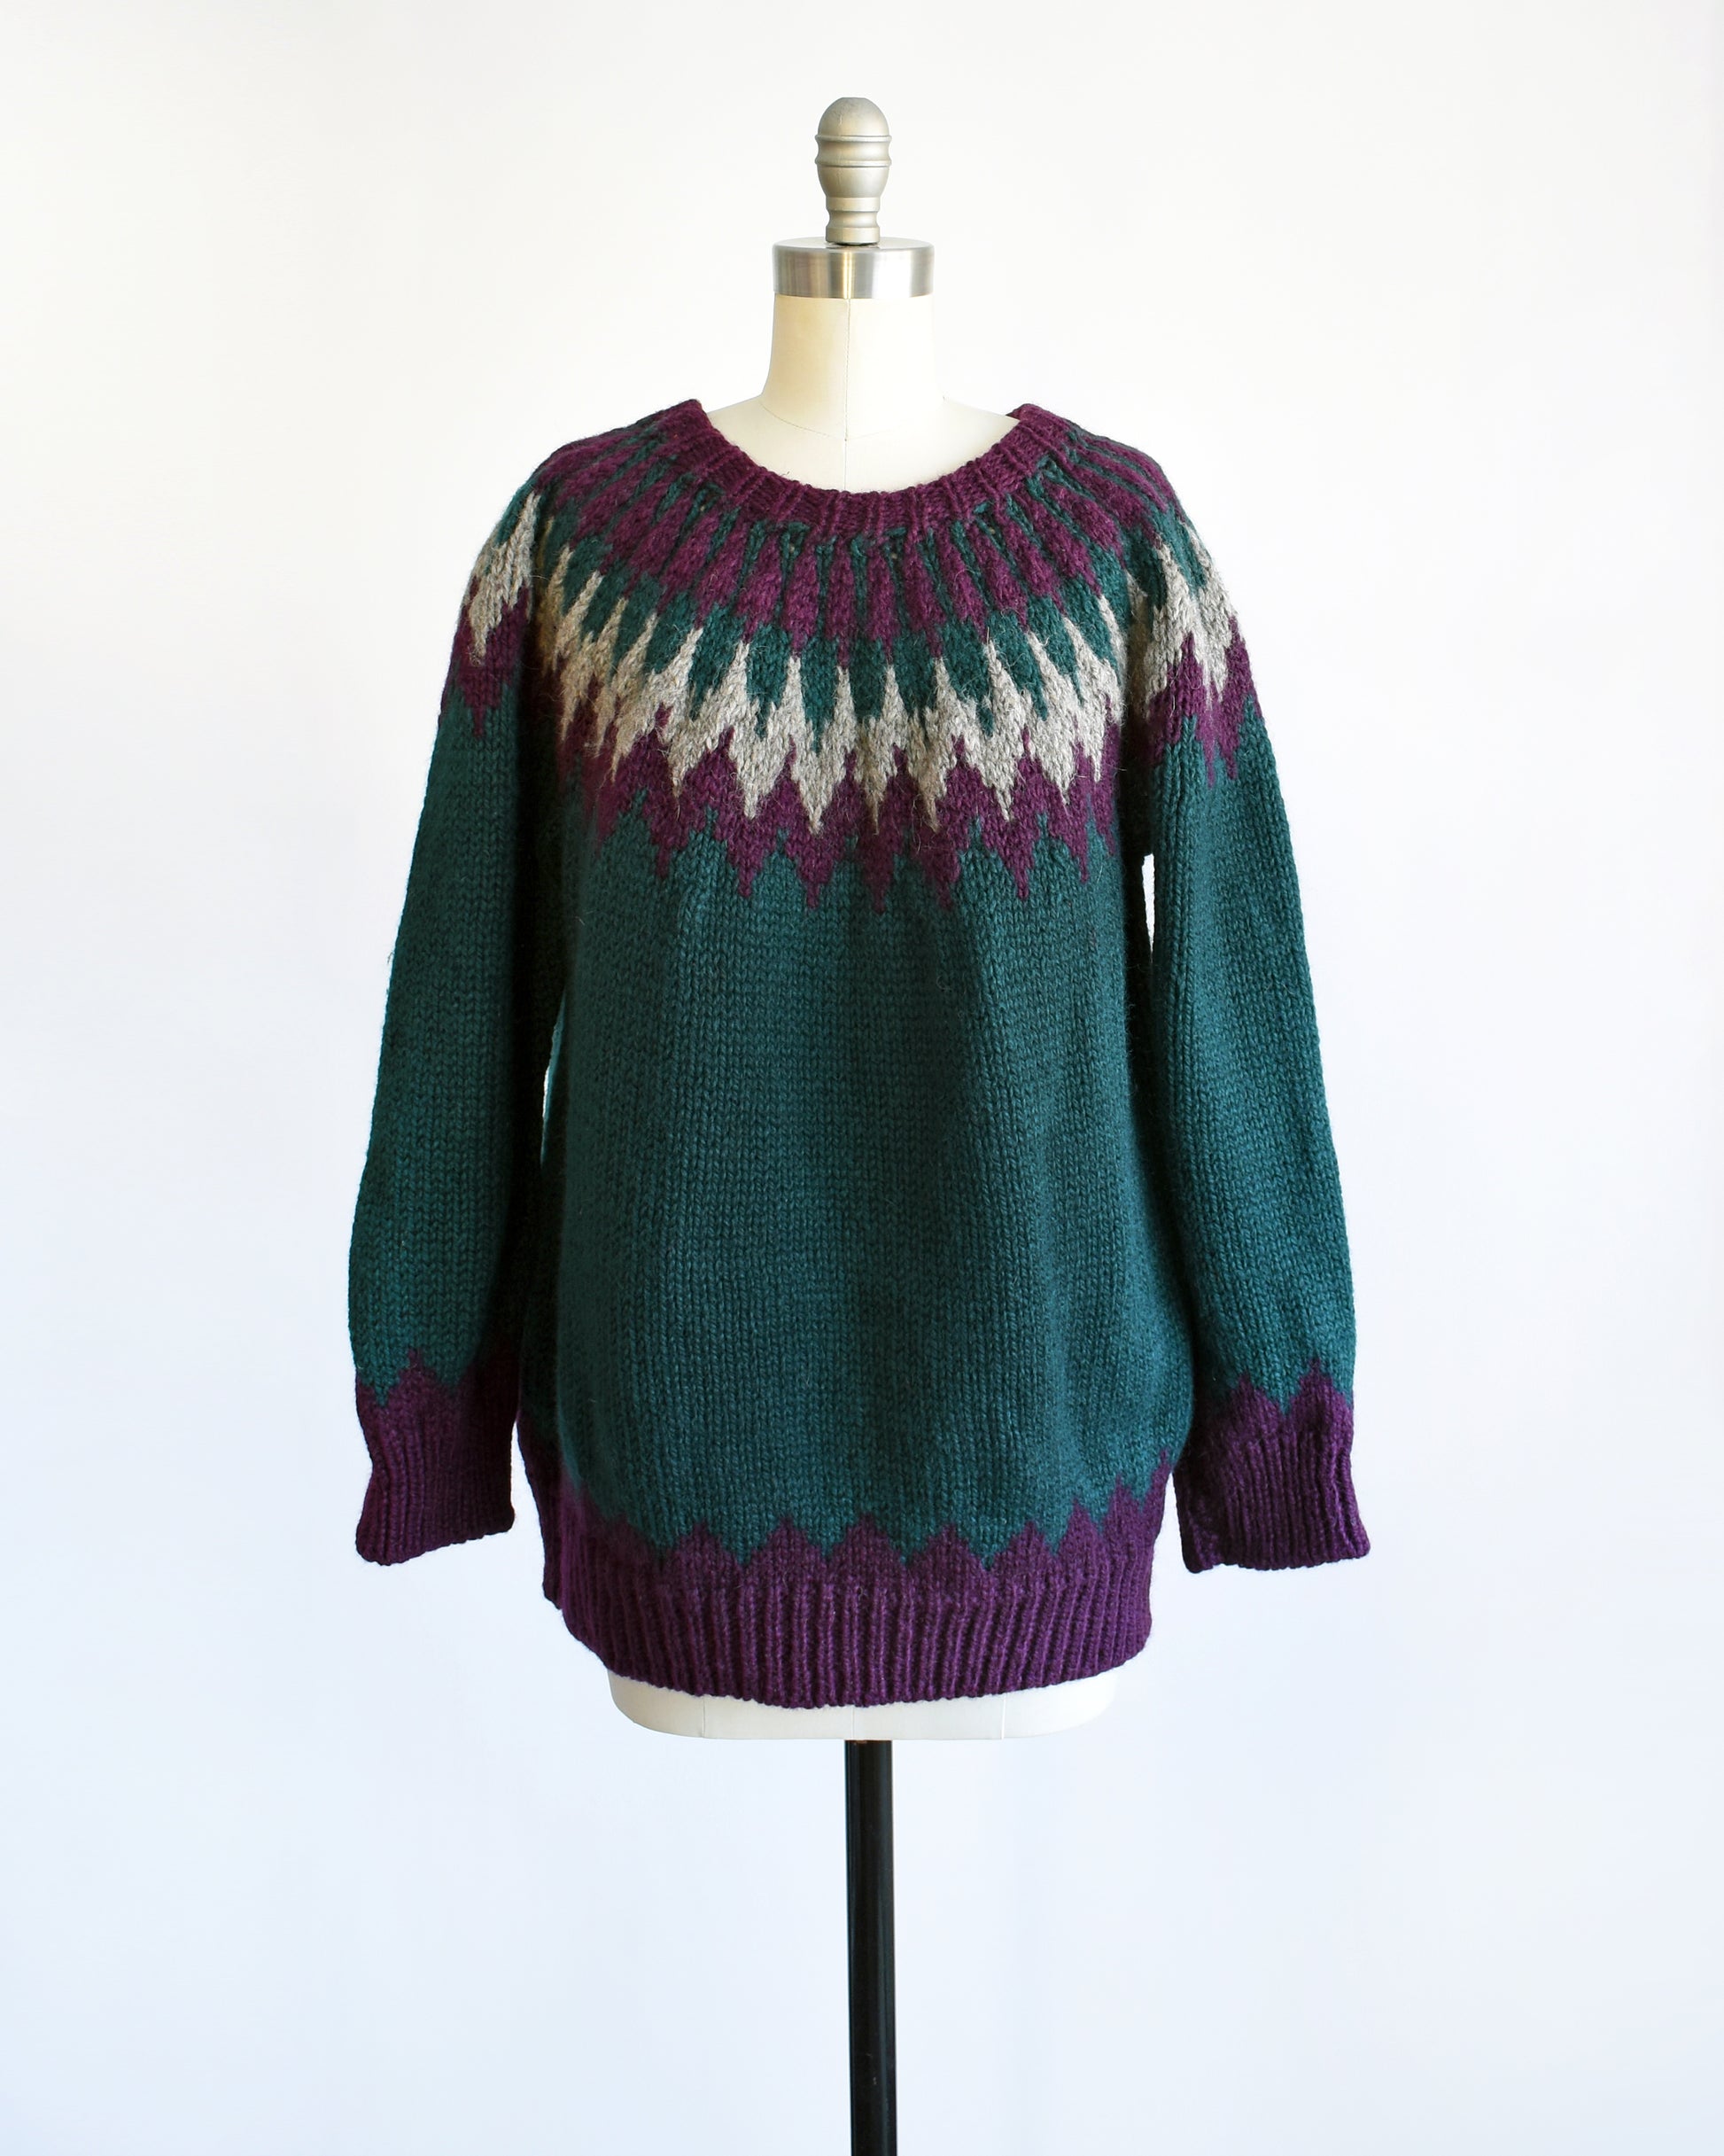 A vintage 1970s dark teal wool Nordic sweater with a purple and gray Fair Isle pattern around the collar. Complimentary purple pattern on the hem and cuffs.